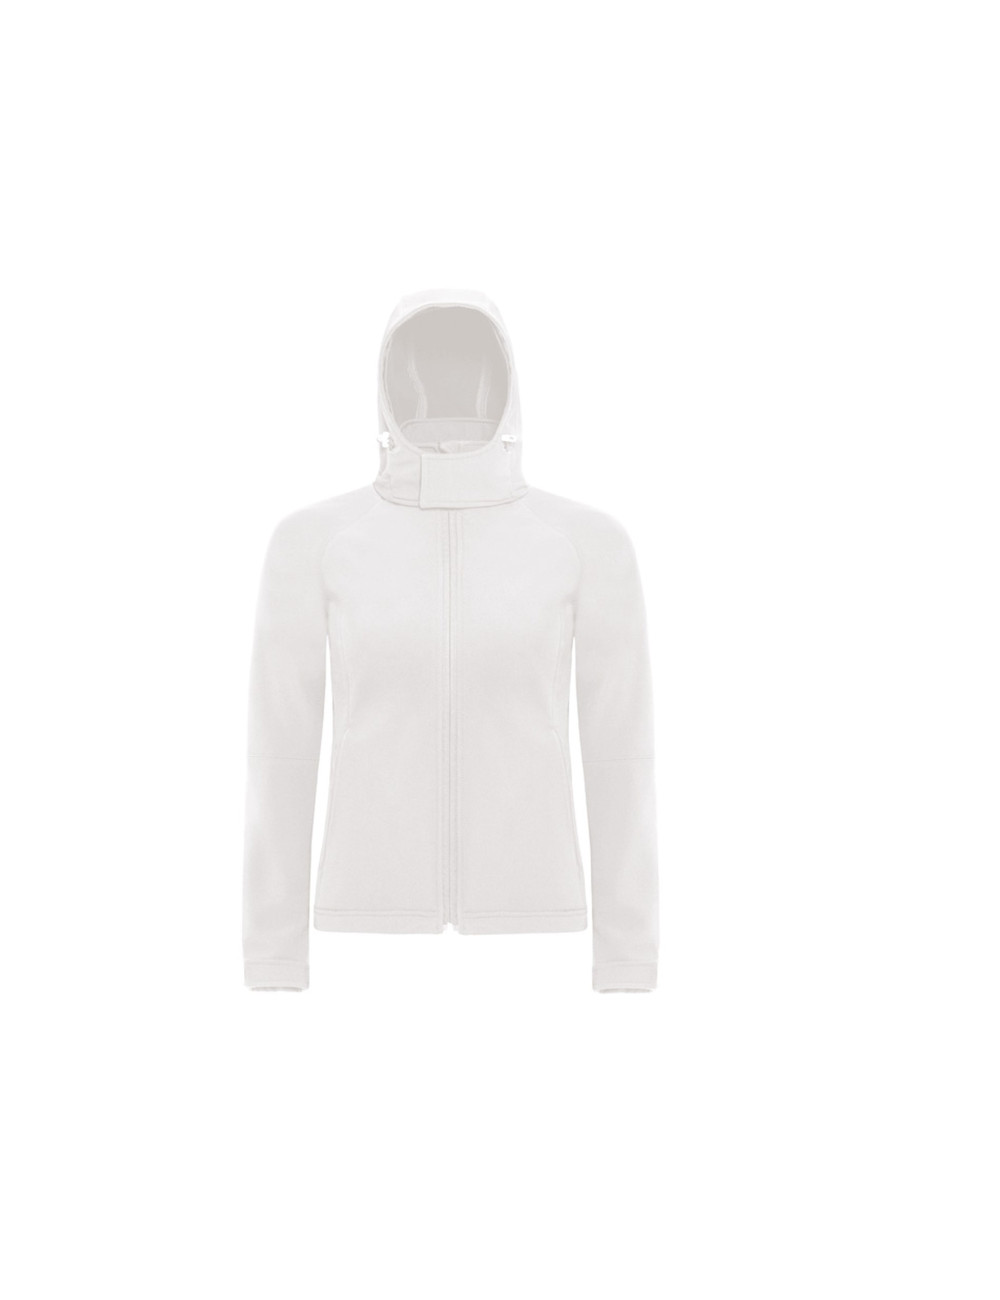 B&C BC660 - Hooded Soft-Shell Women  Colors:White